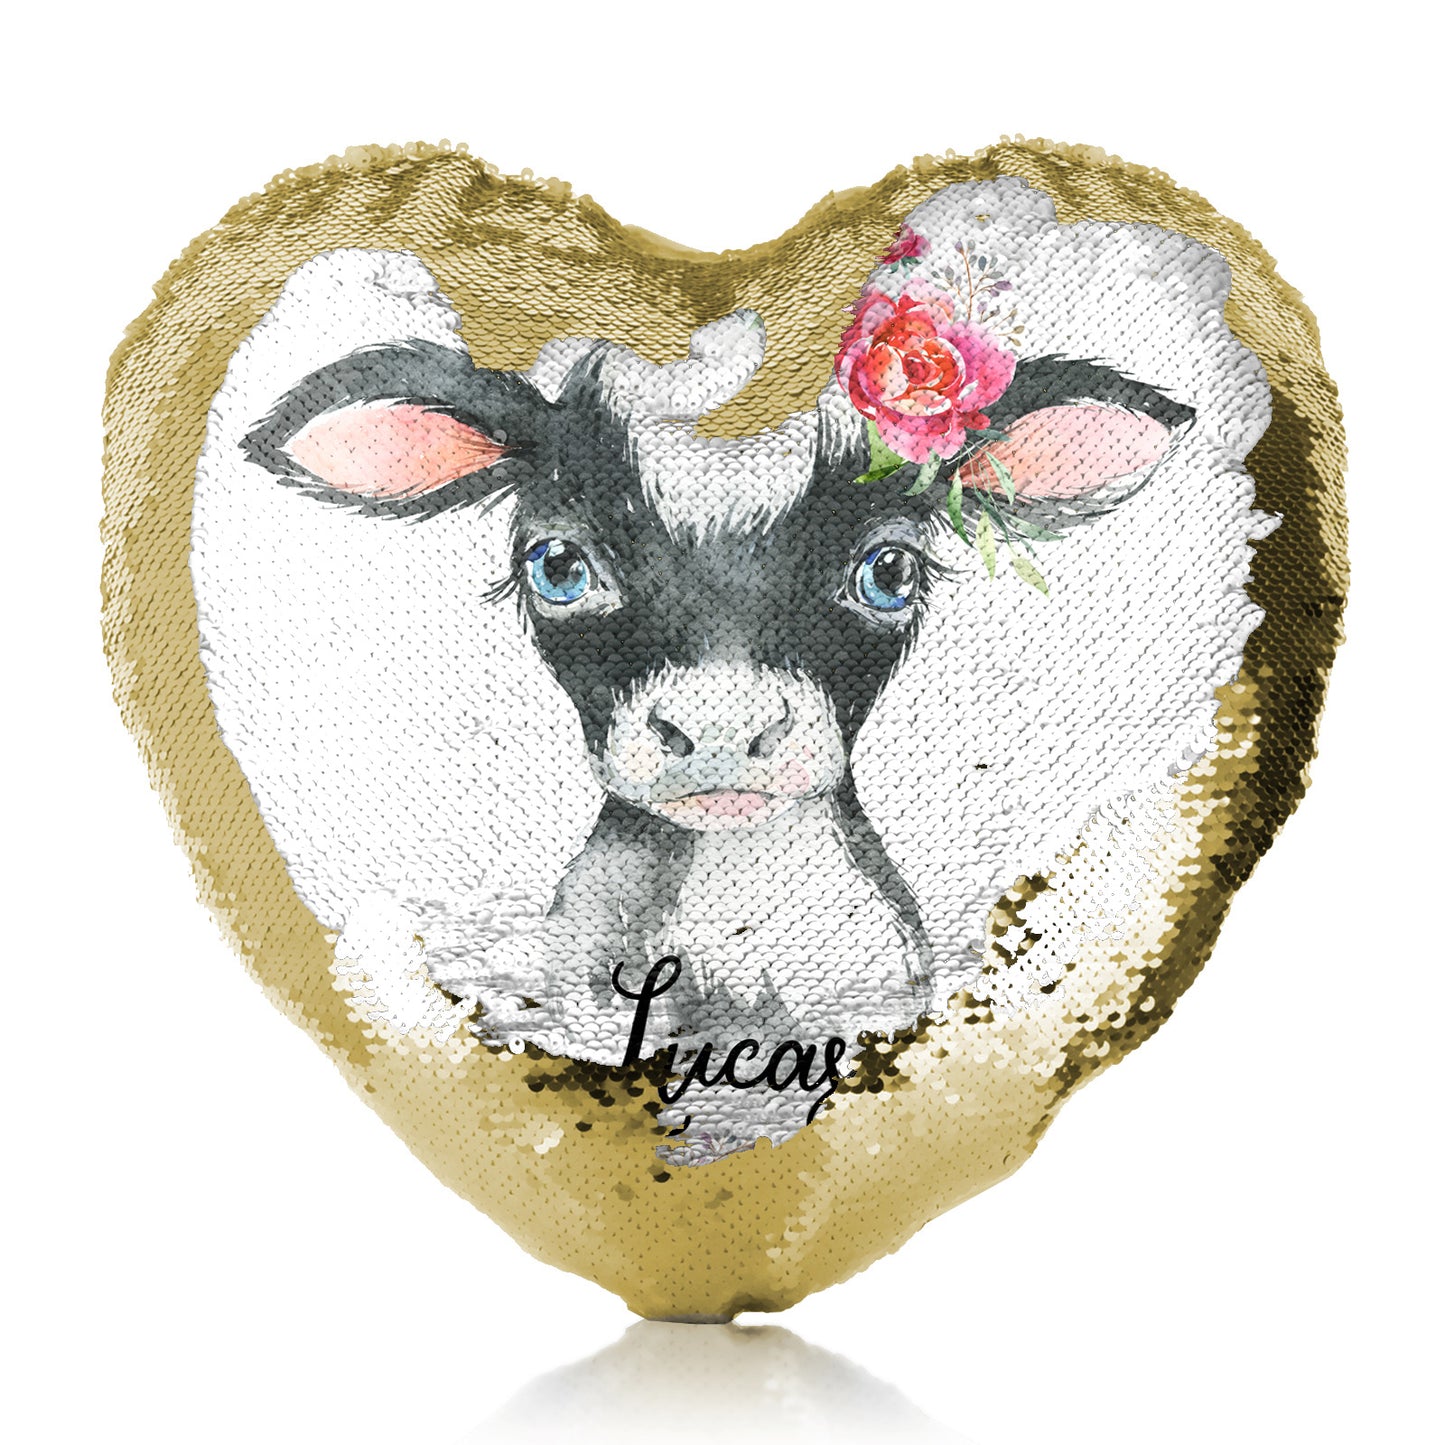 Personalised Sequin Heart Cushion with Black and White Cow Pink Rose Flowers and Cute Text